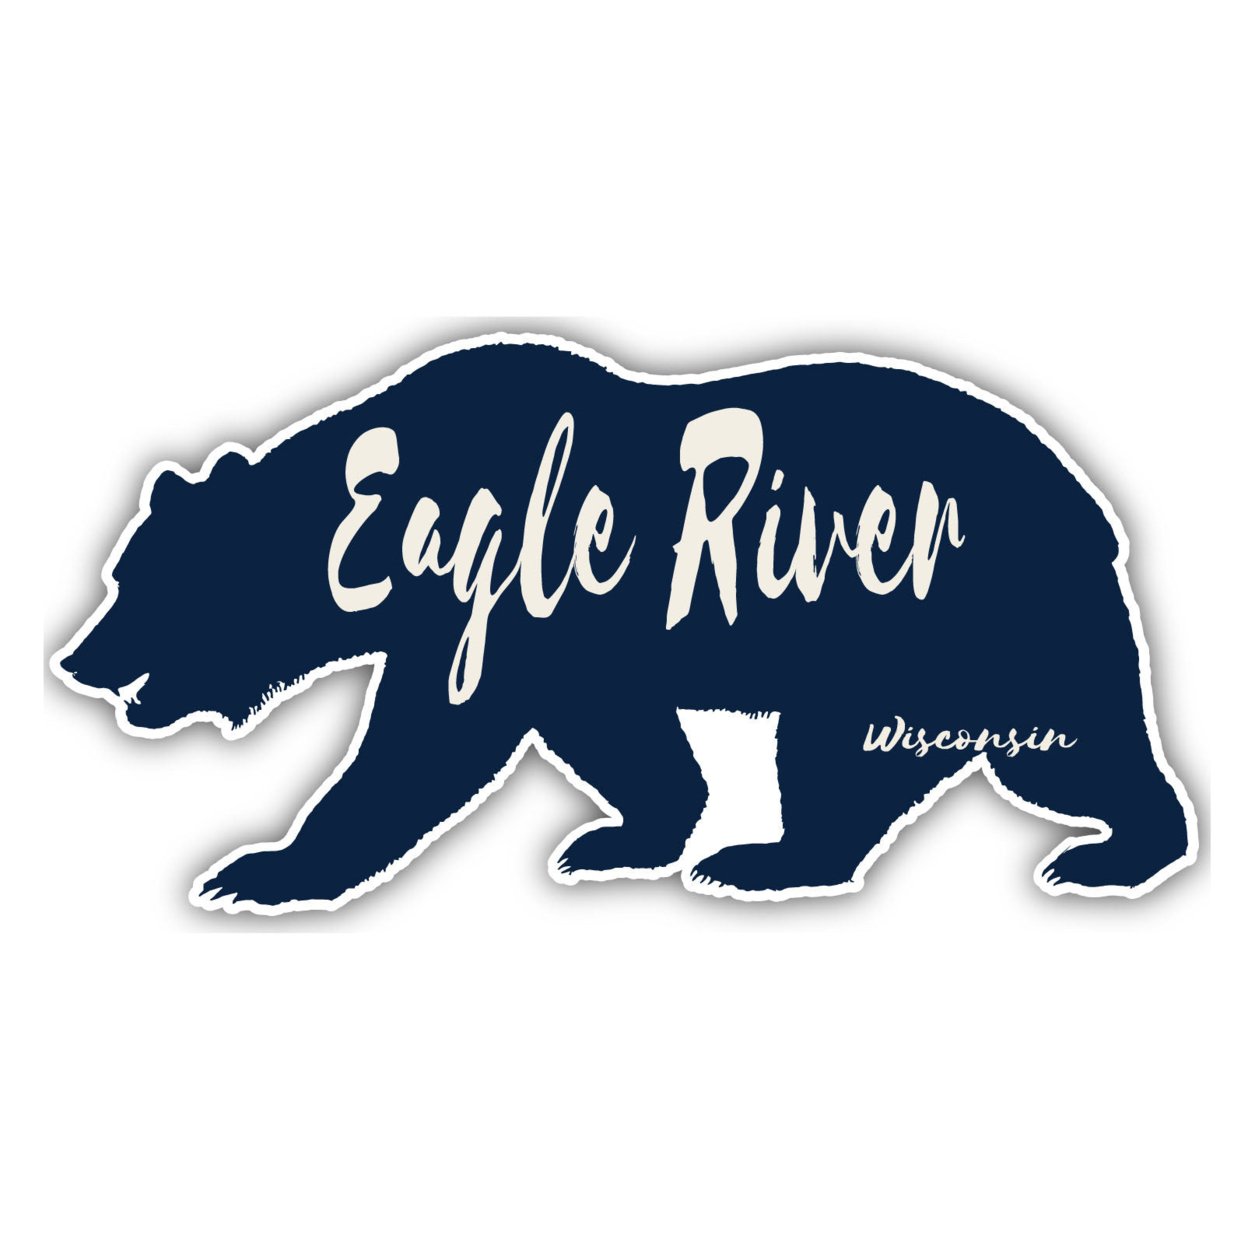 Eagle River Wisconsin Souvenir Decorative Stickers (Choose Theme And Size) - 4-Pack, 4-Inch, Bear